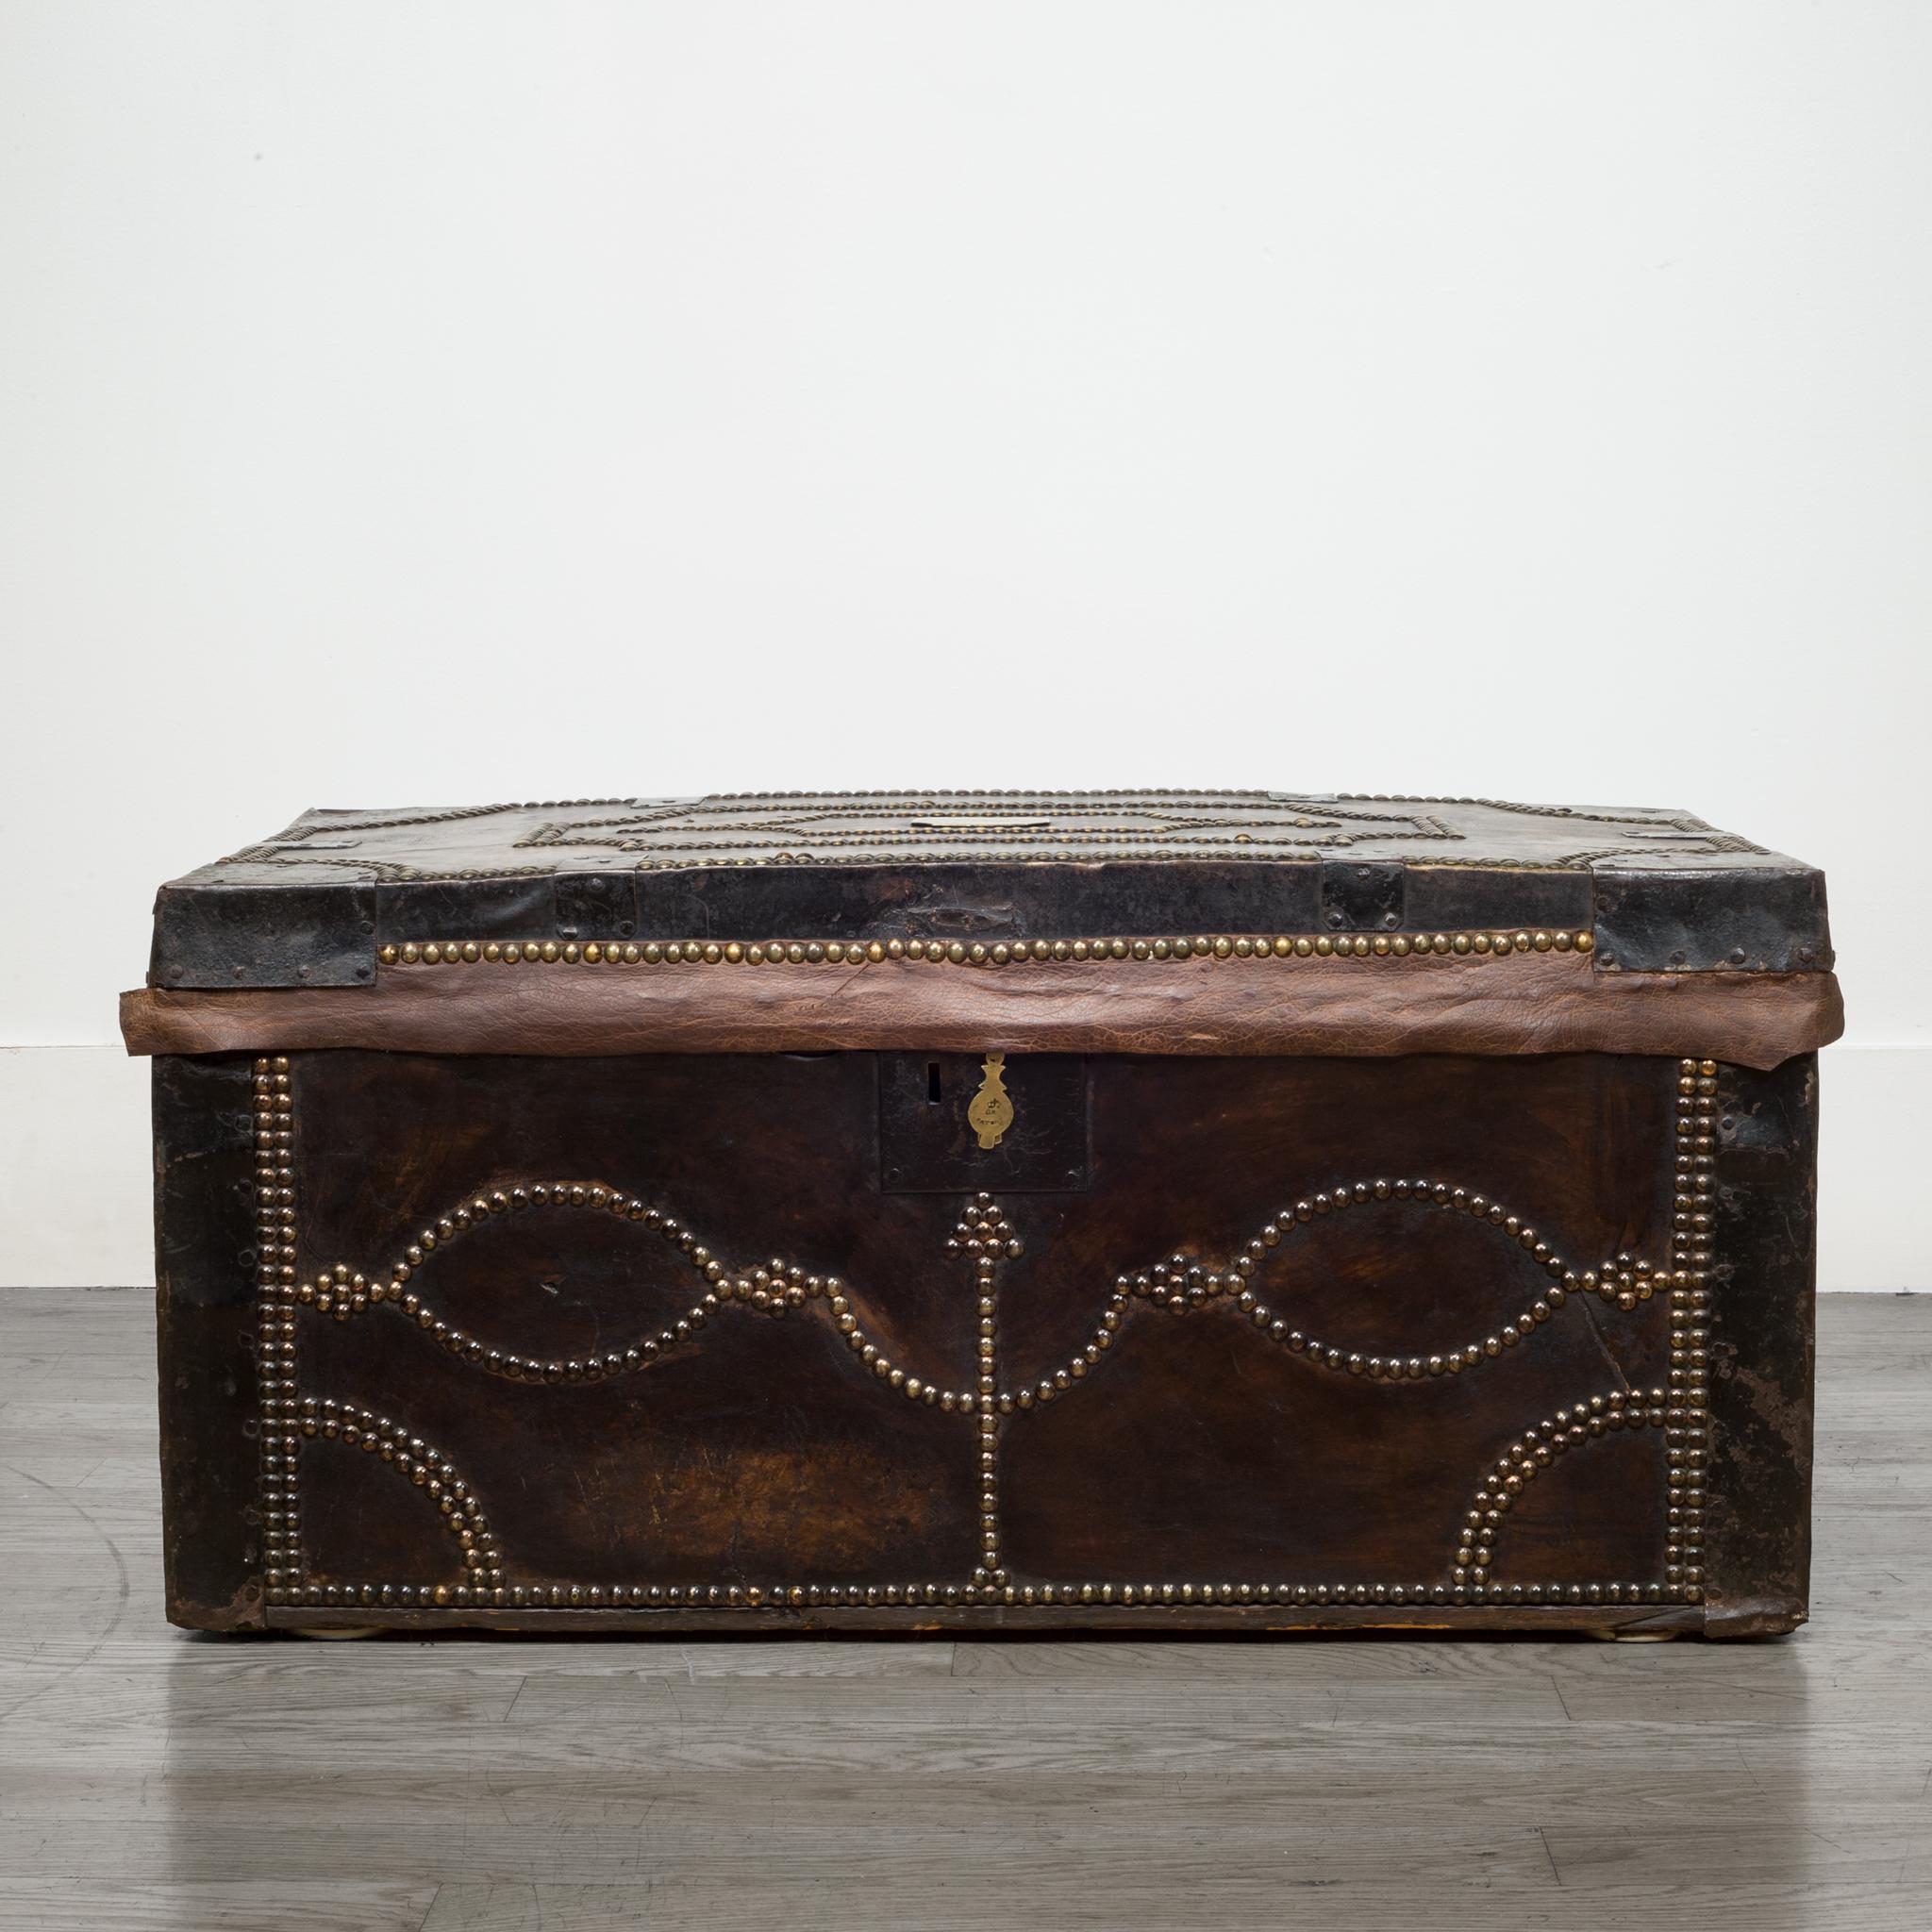 About

This is an original English document chest. This piece is made of oak, stretched leather, steel handles and brackets and covered in brass studs. A brass plaque on the top is engraved 